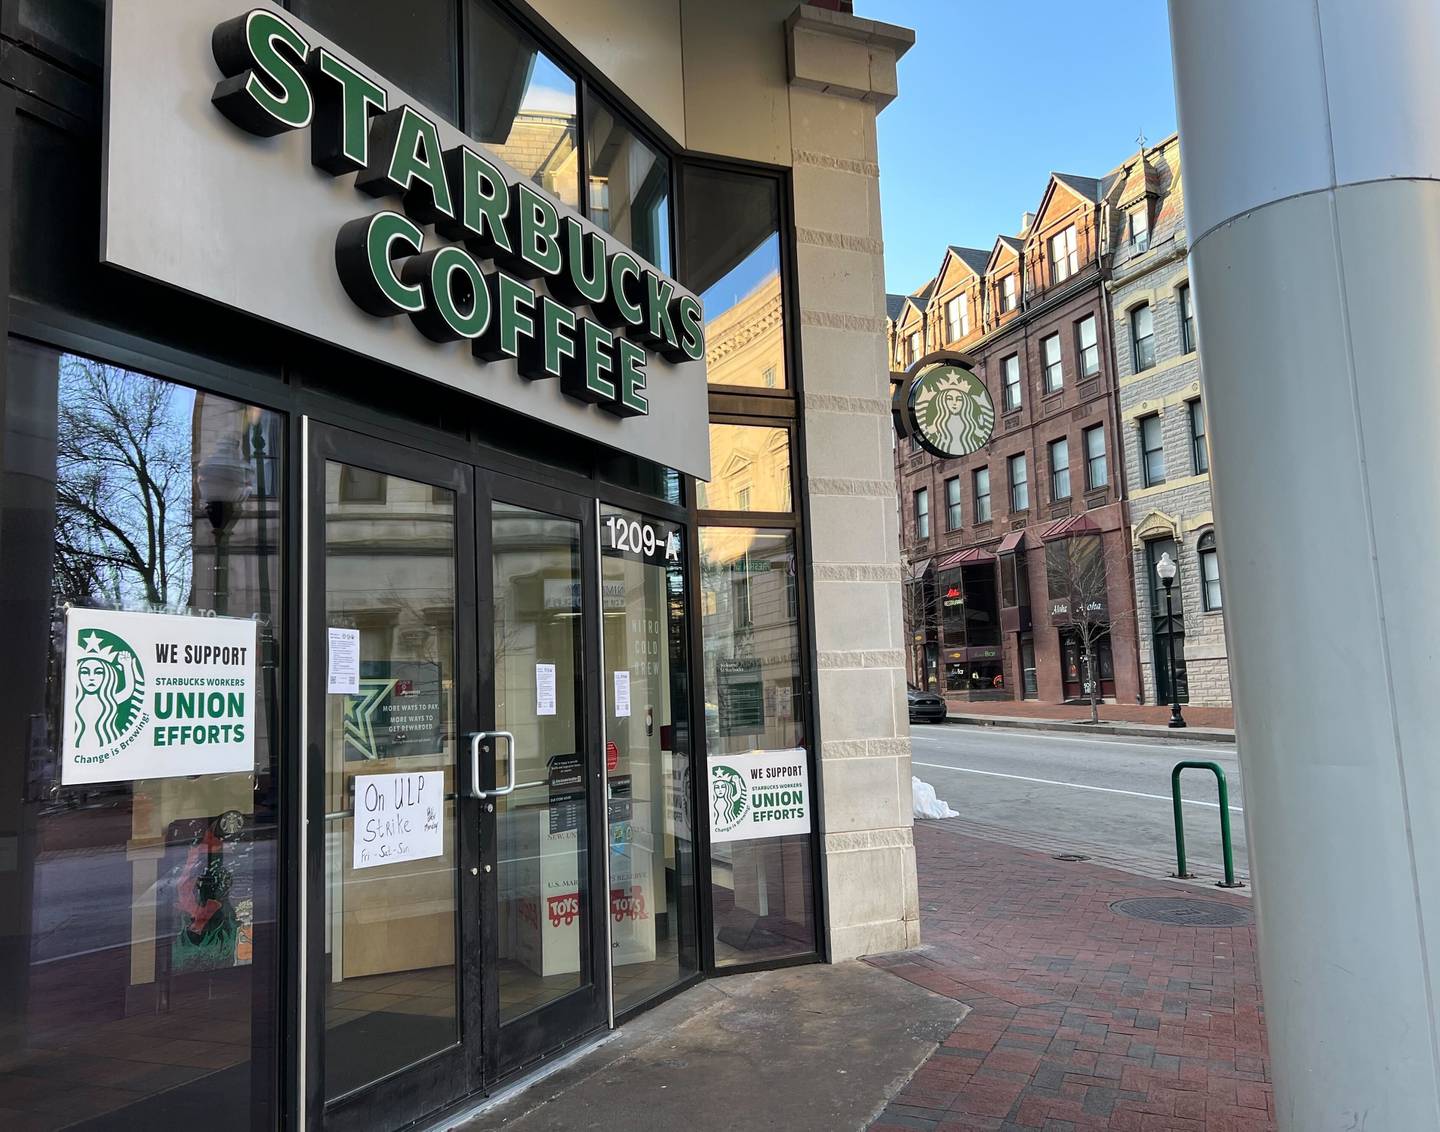 The Starbucks on North Charles Street in Baltimore is closed and covered with signs in support of Starbucks Workers Union, a labor union.